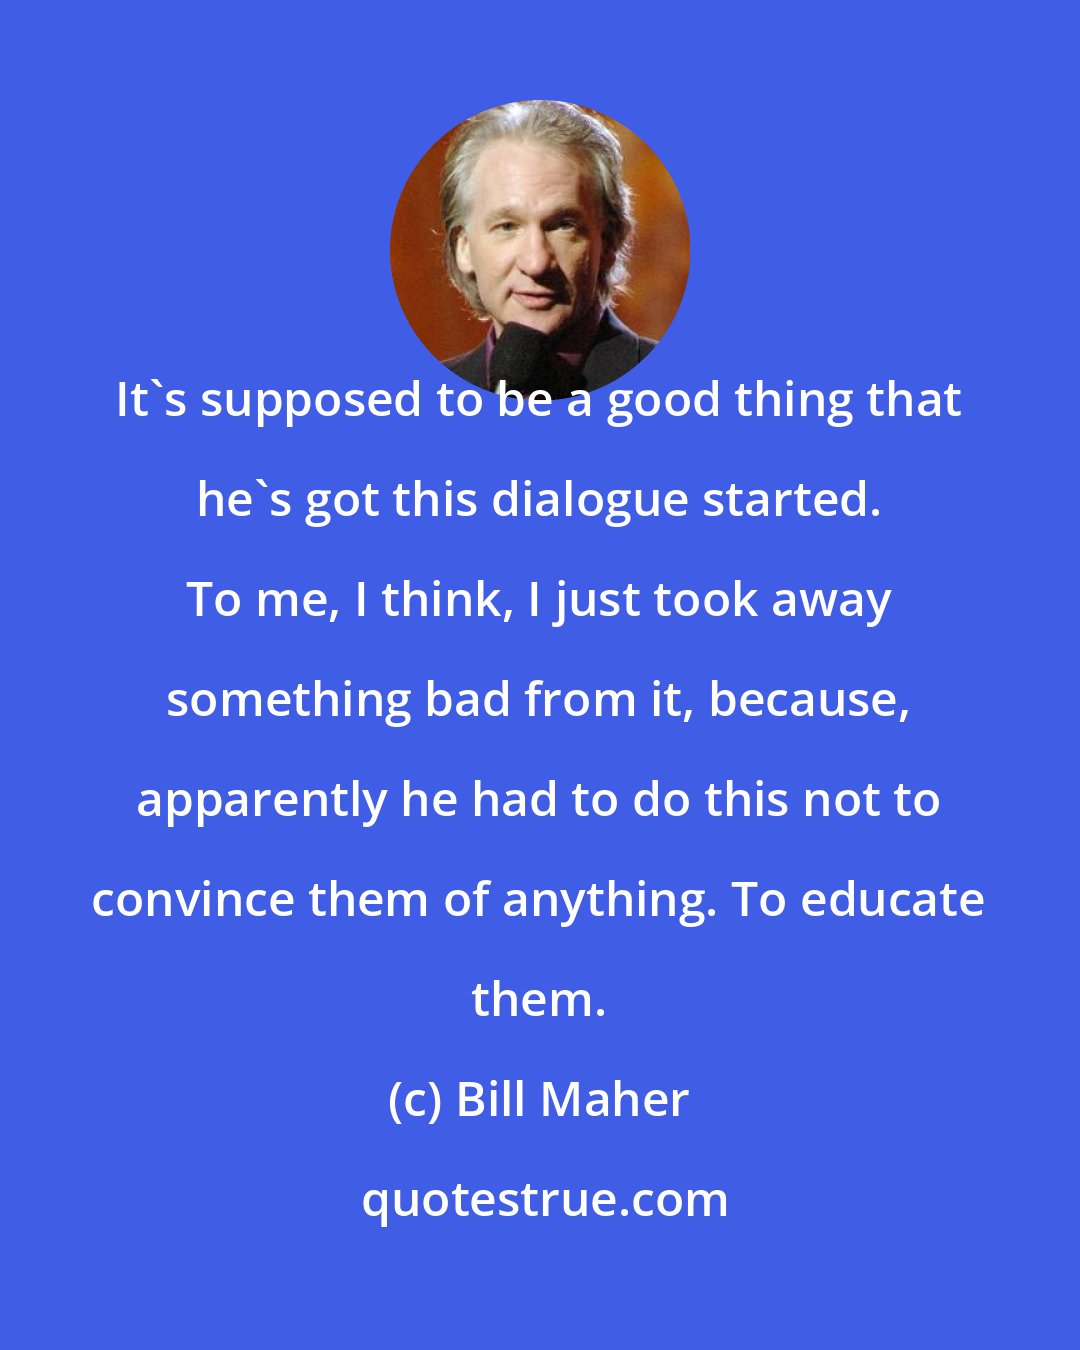 Bill Maher: It's supposed to be a good thing that he's got this dialogue started. To me, I think, I just took away something bad from it, because, apparently he had to do this not to convince them of anything. To educate them.